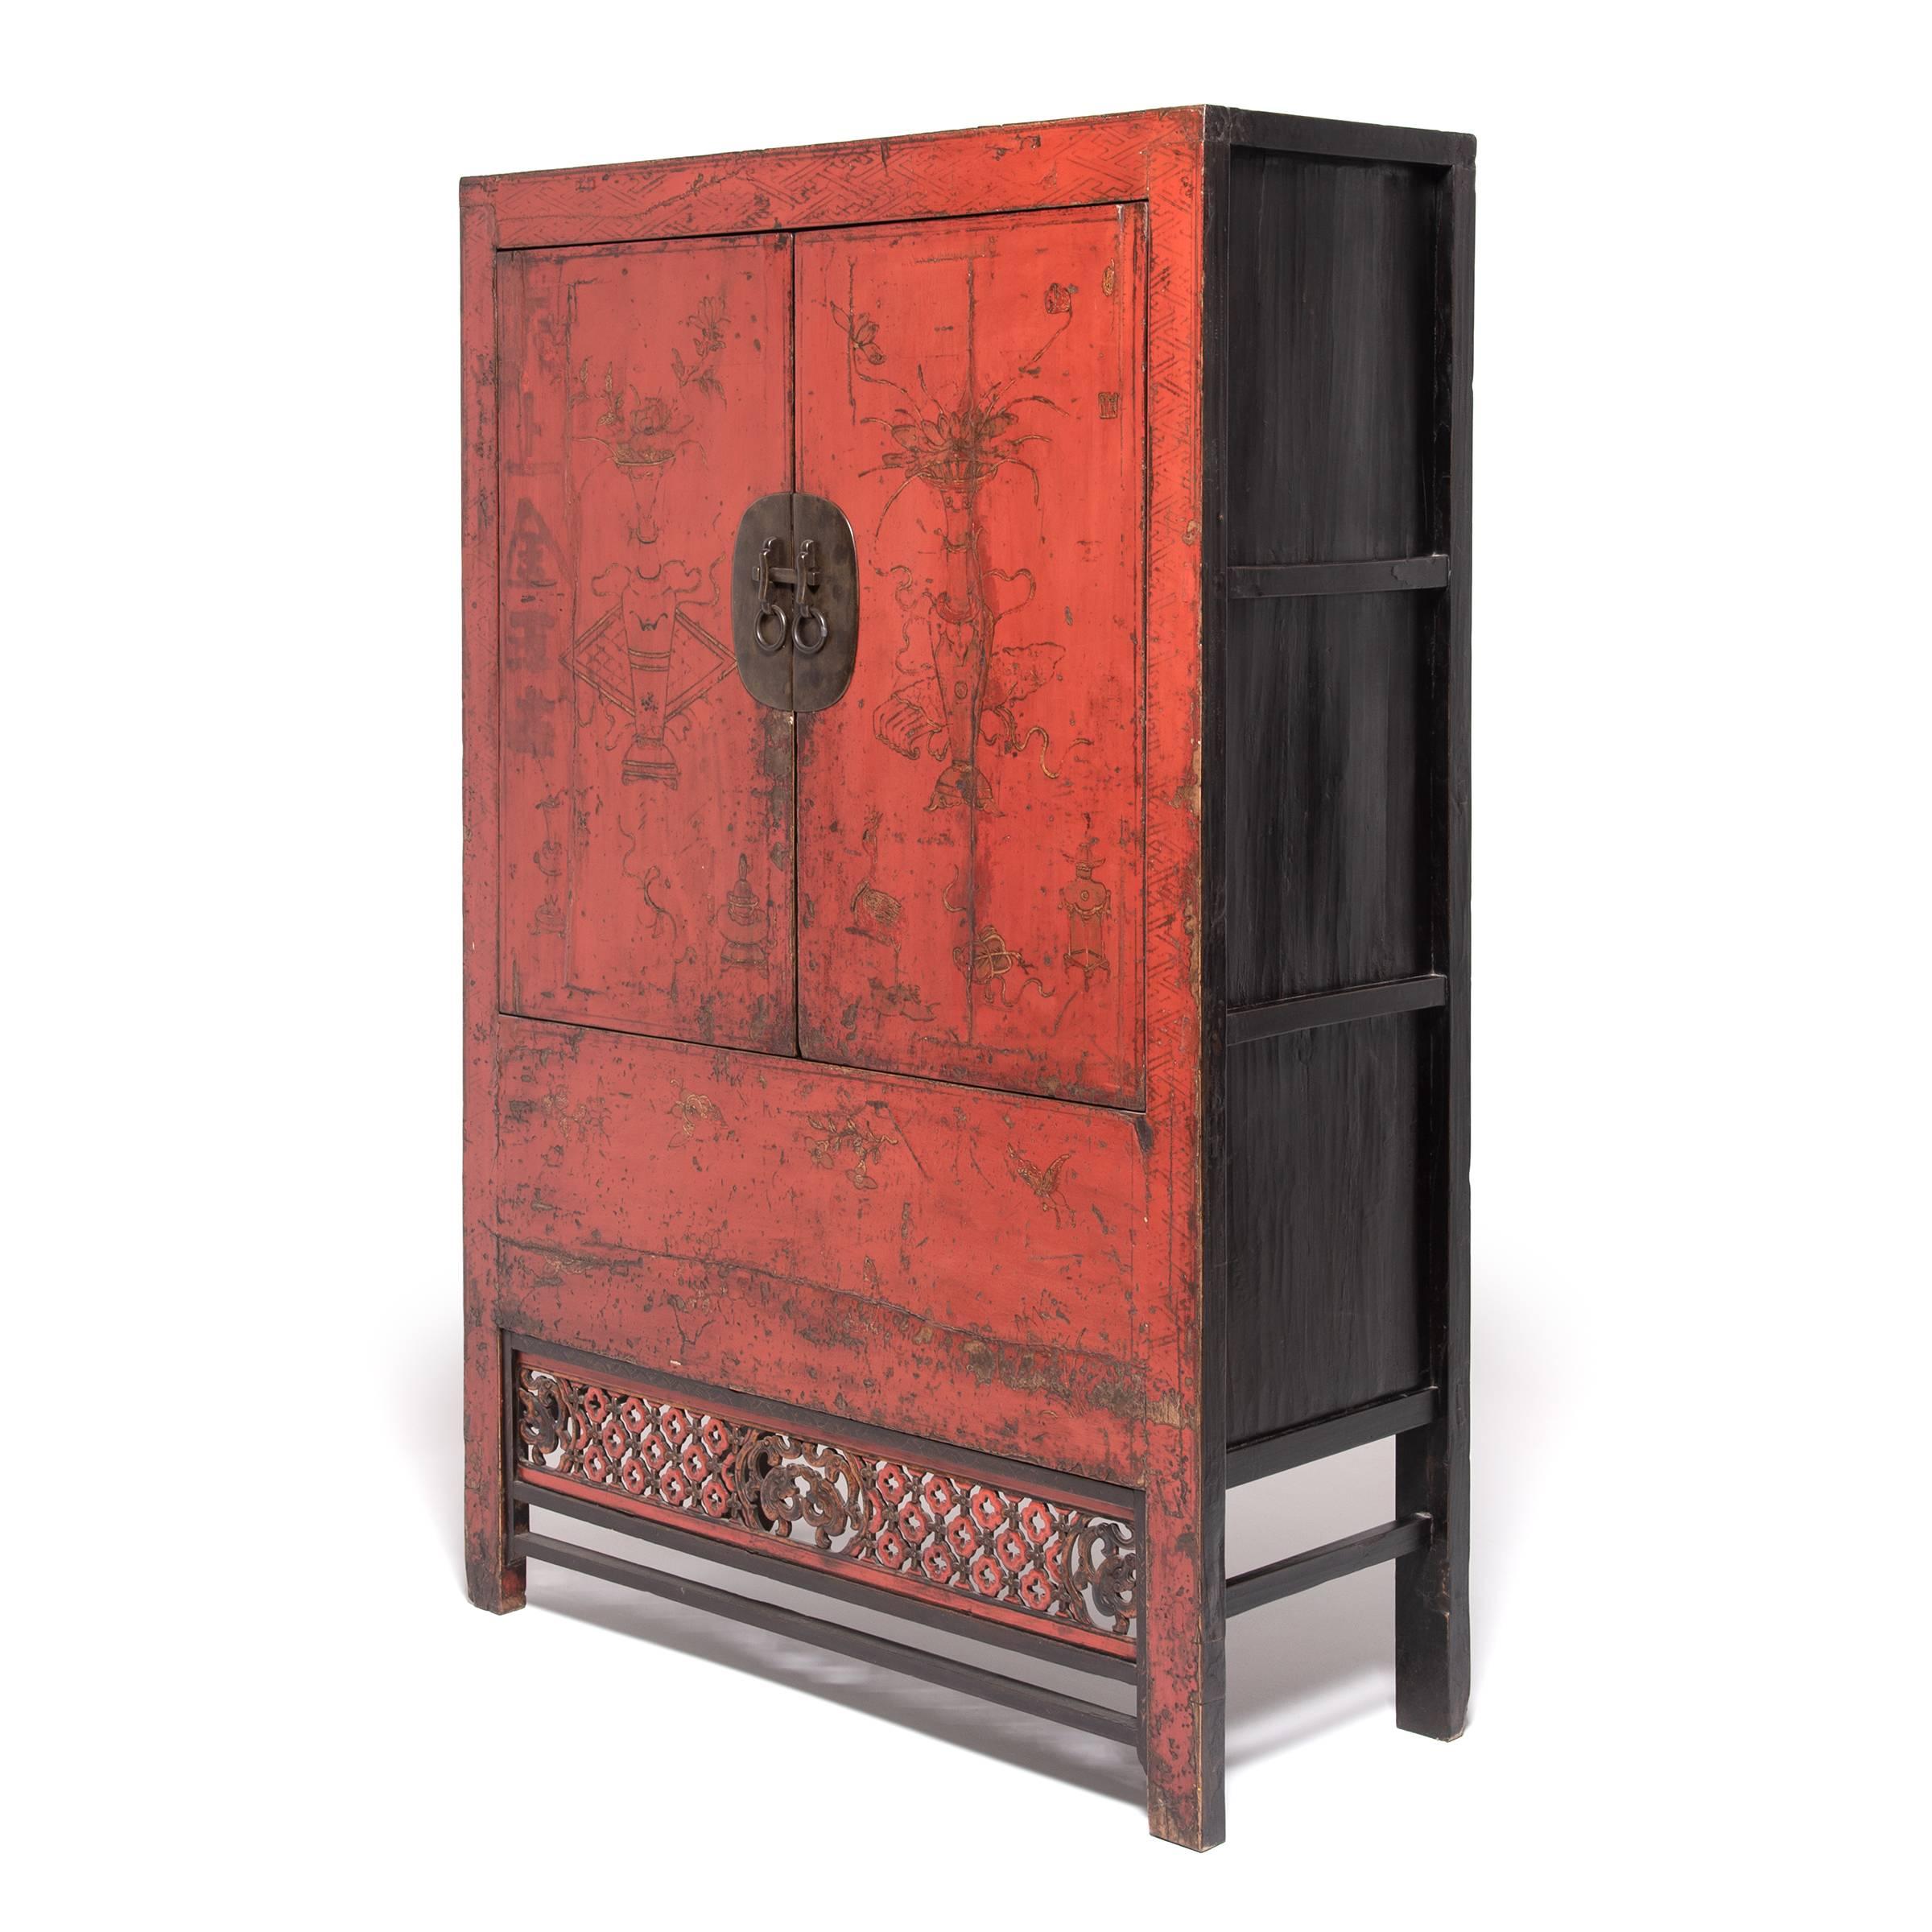 This red lacquer cabinet is an excellent example of the rich, decorative style of cabinetry built during the 19th century in China's Shanxi province. Traces of the original gilt paintings depicting vases with auspicious flowers remain. The